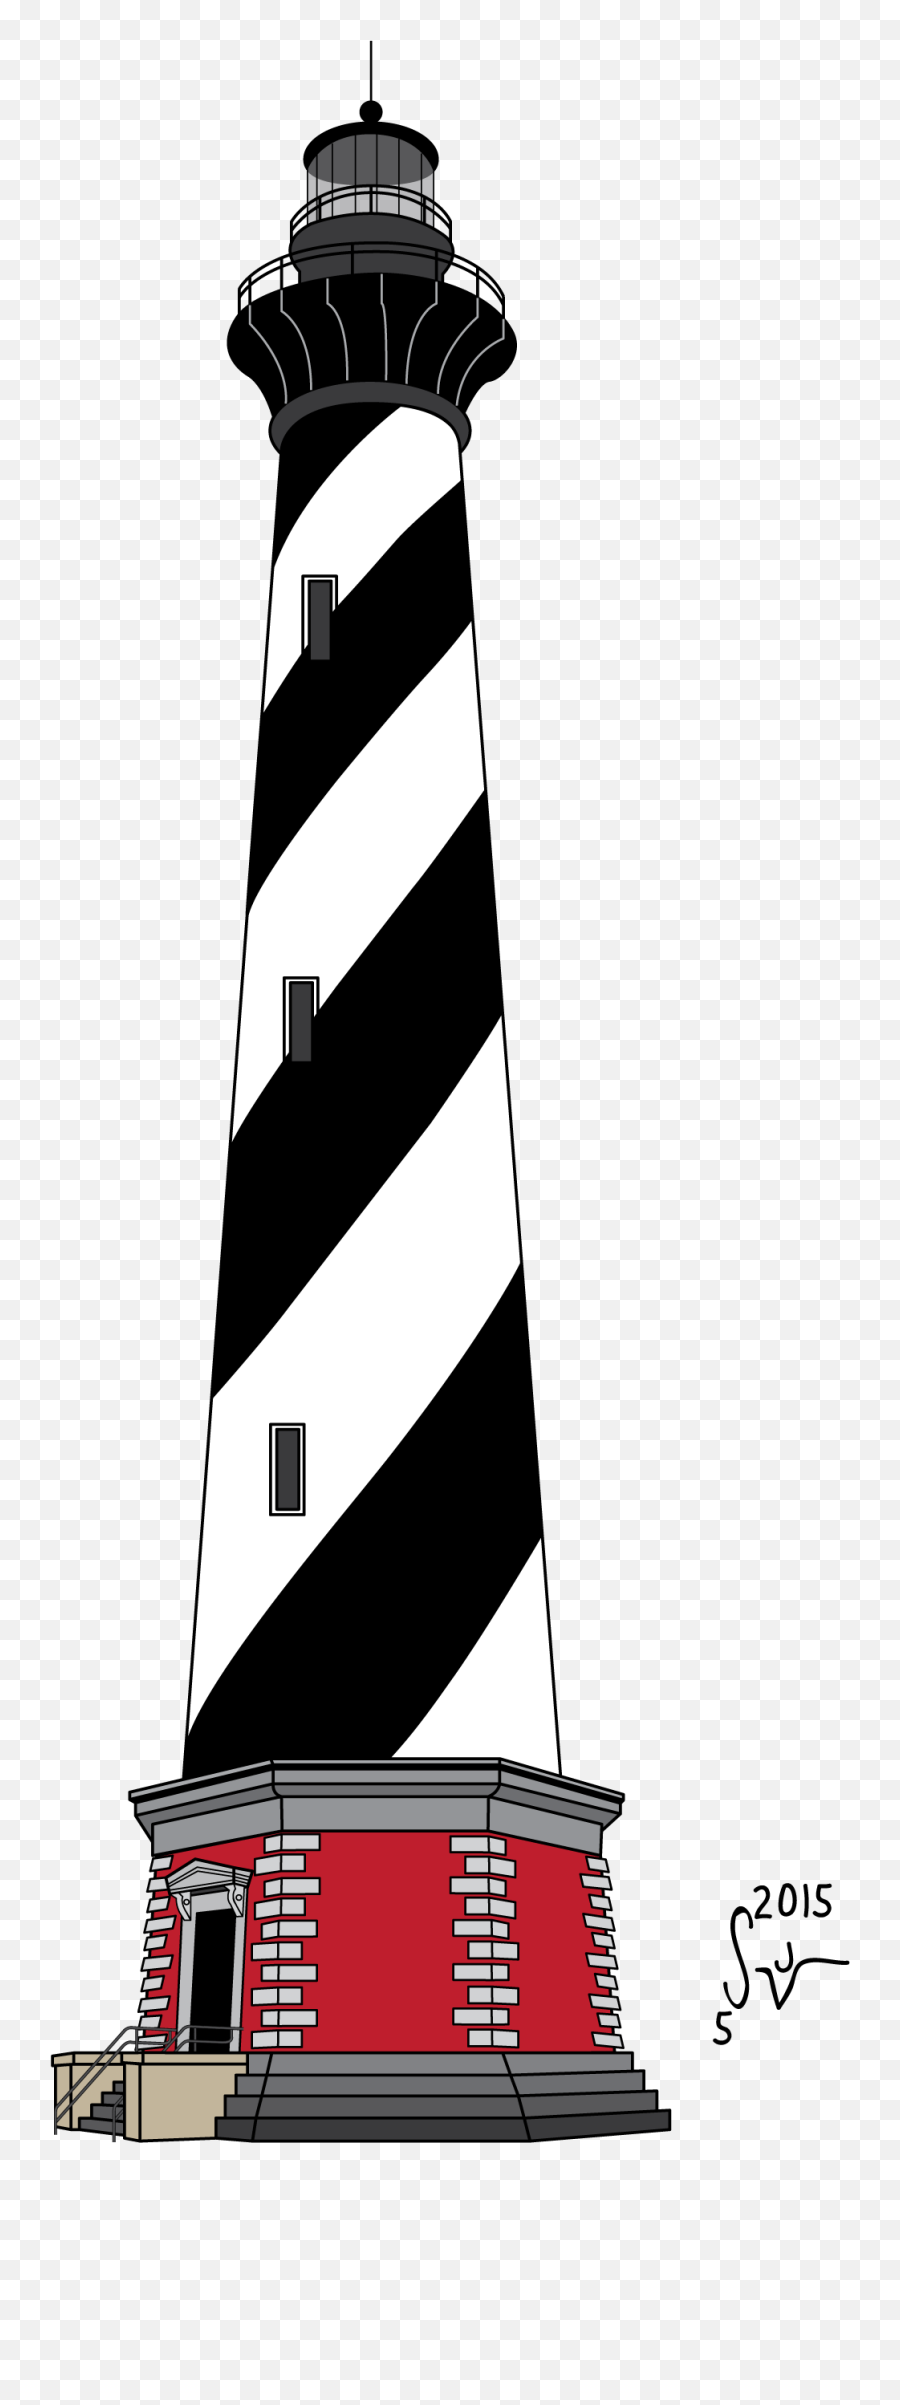 Free Lighthouse Images Black And White Download Free Emoji,Free Lighthouse Clipart